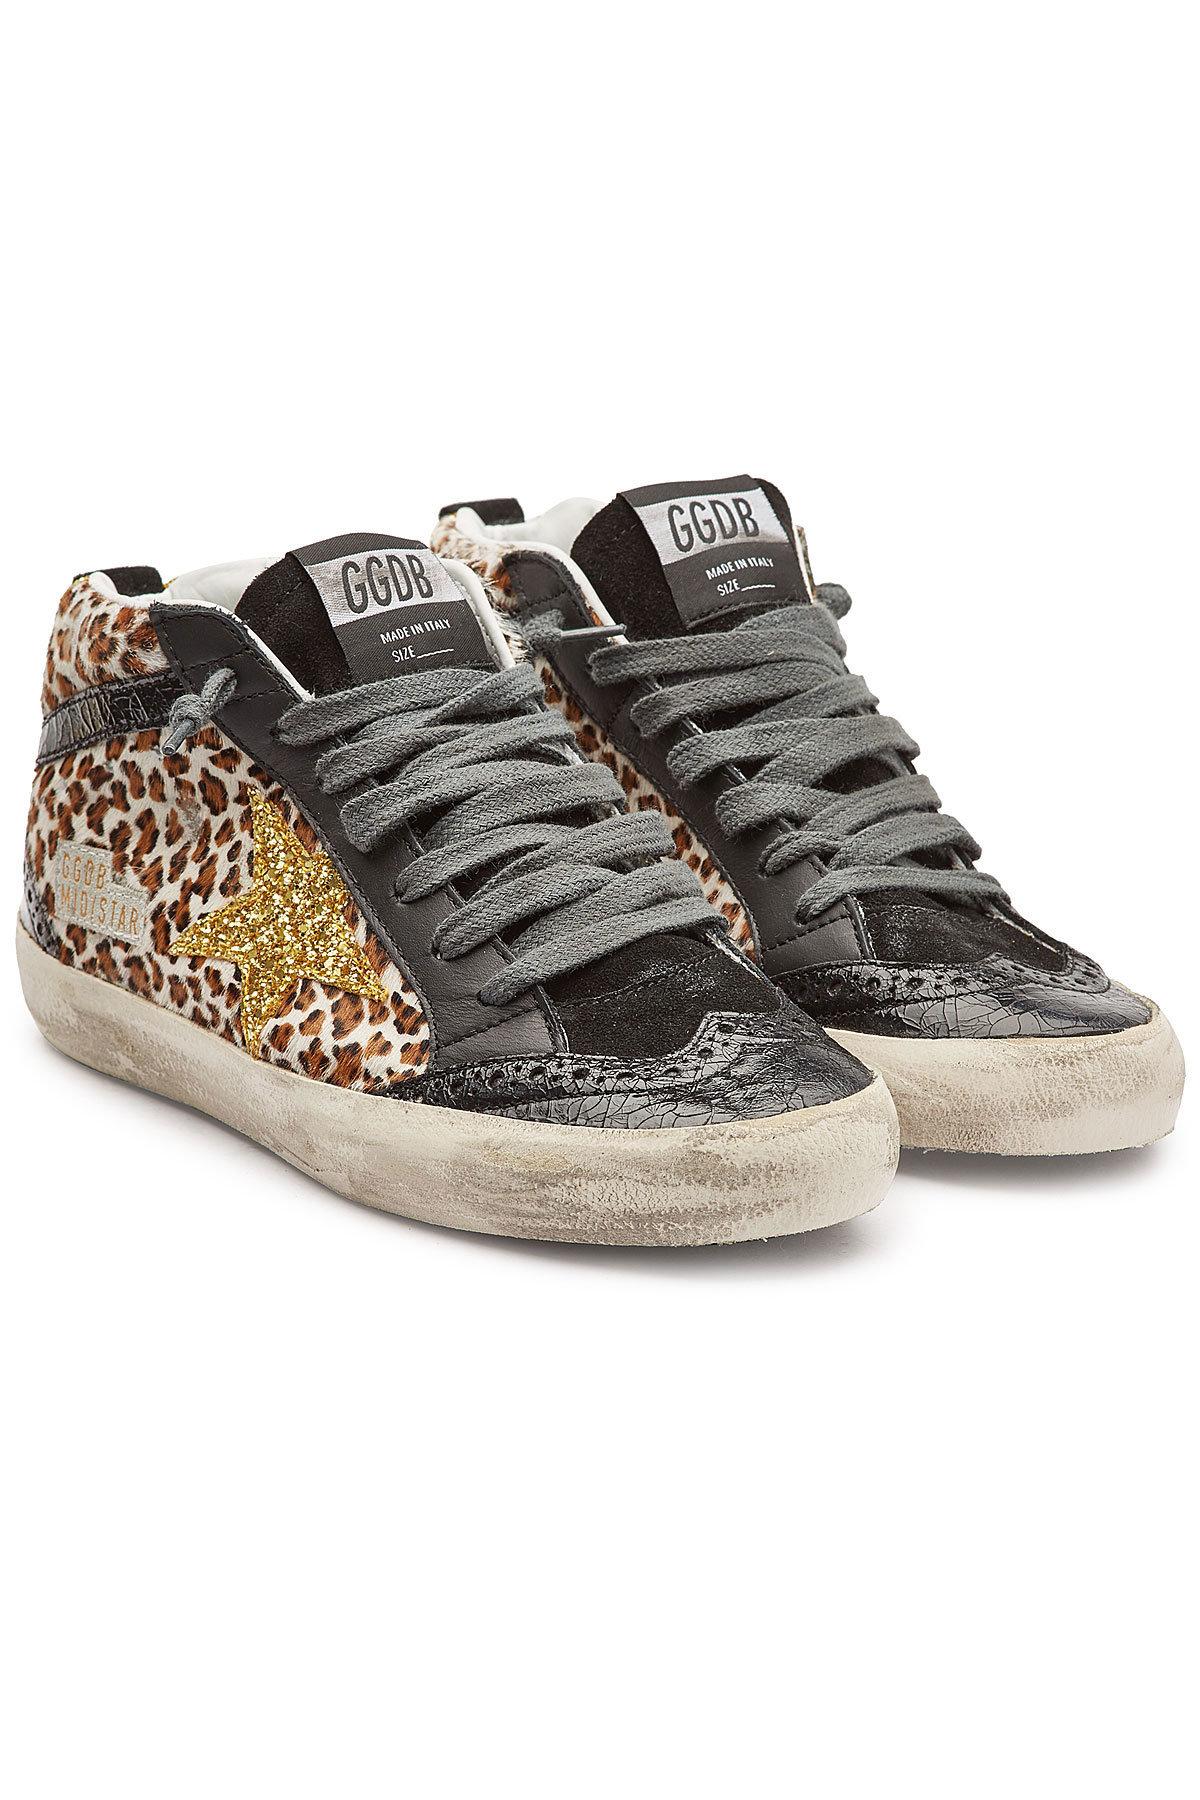 Lyst - Golden Goose Deluxe Brand Mid Star Sneakers With Calf Hair ...